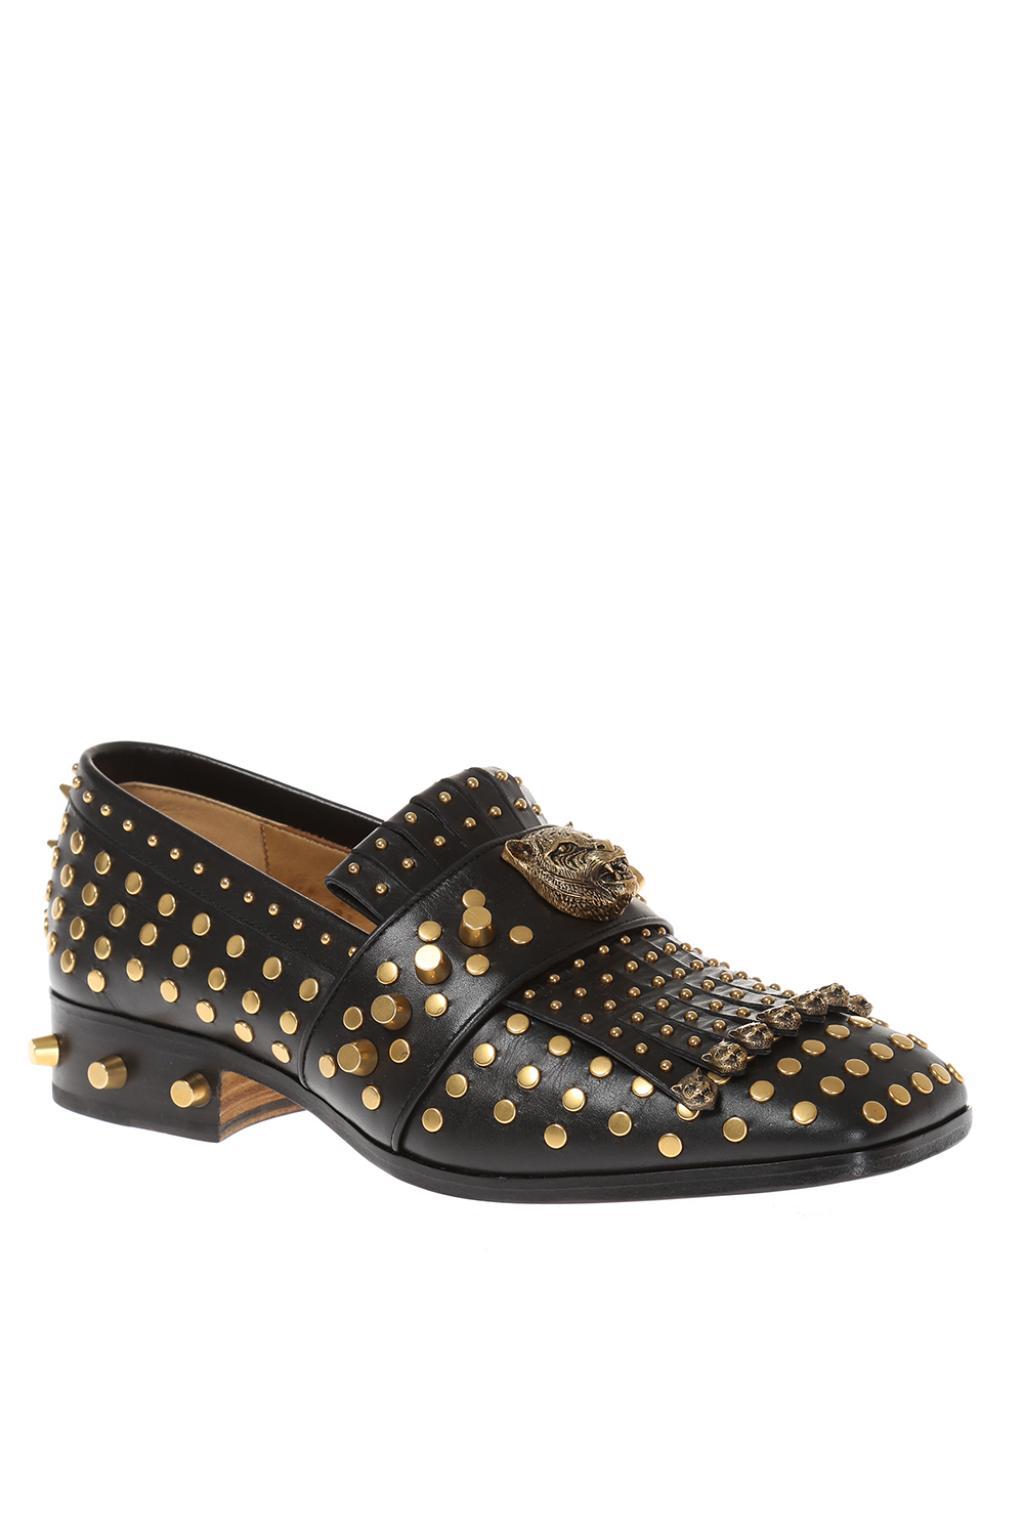 Gucci Studded Leather Shoes in Black for Men - Lyst